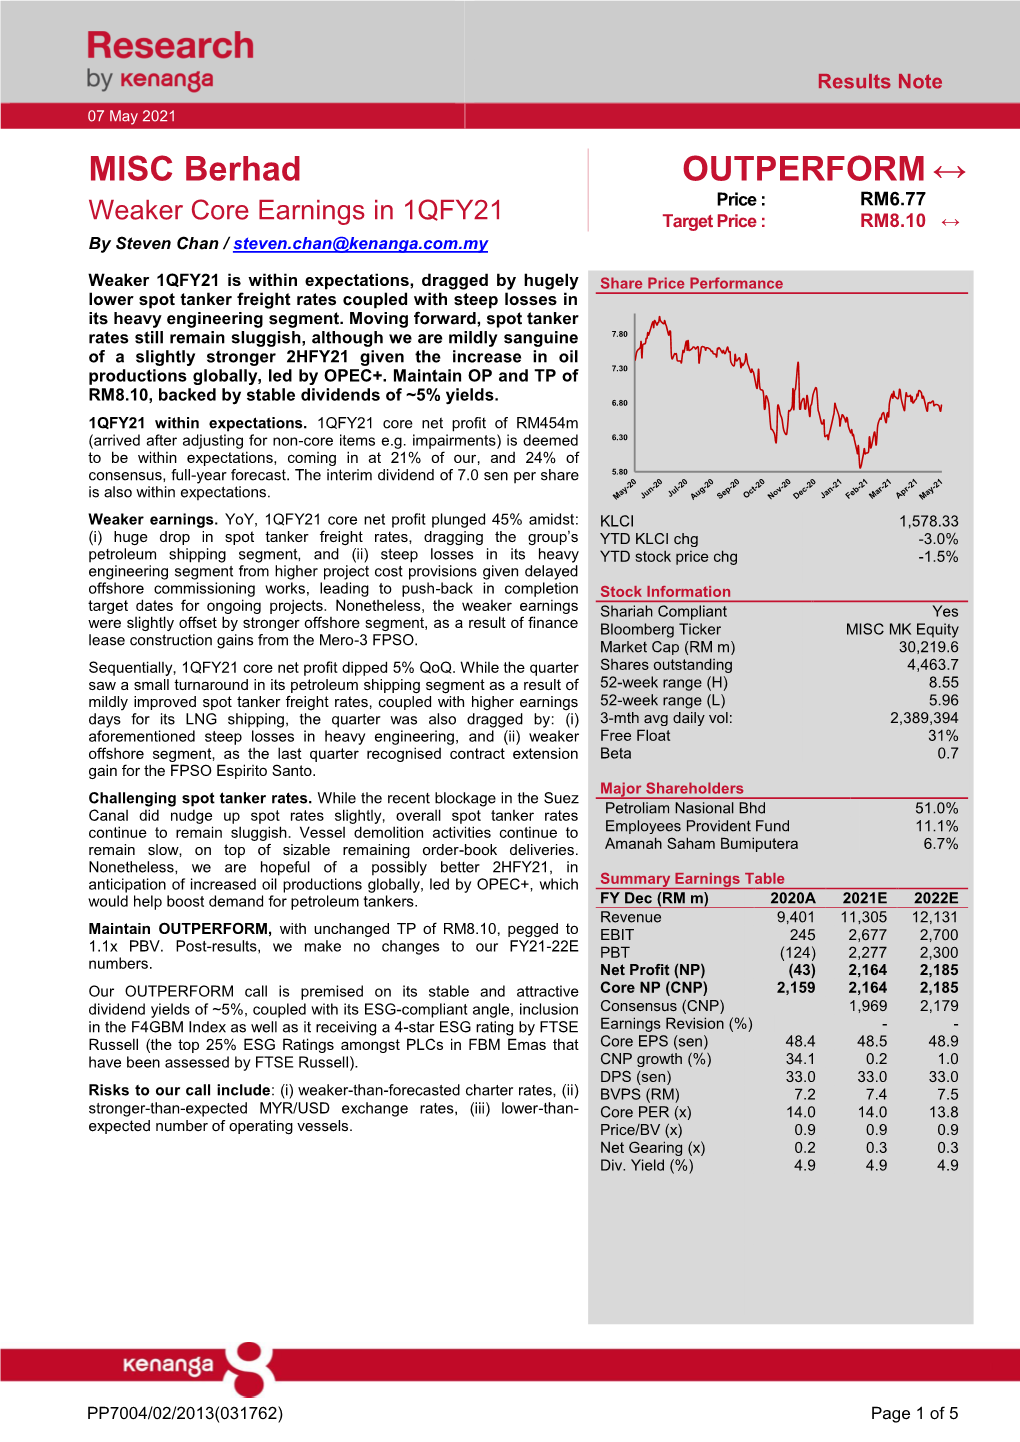 MISC Berhad OUTPERFORM ↔ Price : RM6.77 Weaker Core Earnings in 1QFY21 Target Price : RM8.10 ↔ by Steven Chan / Steven.Chan@Kenanga.Com.My